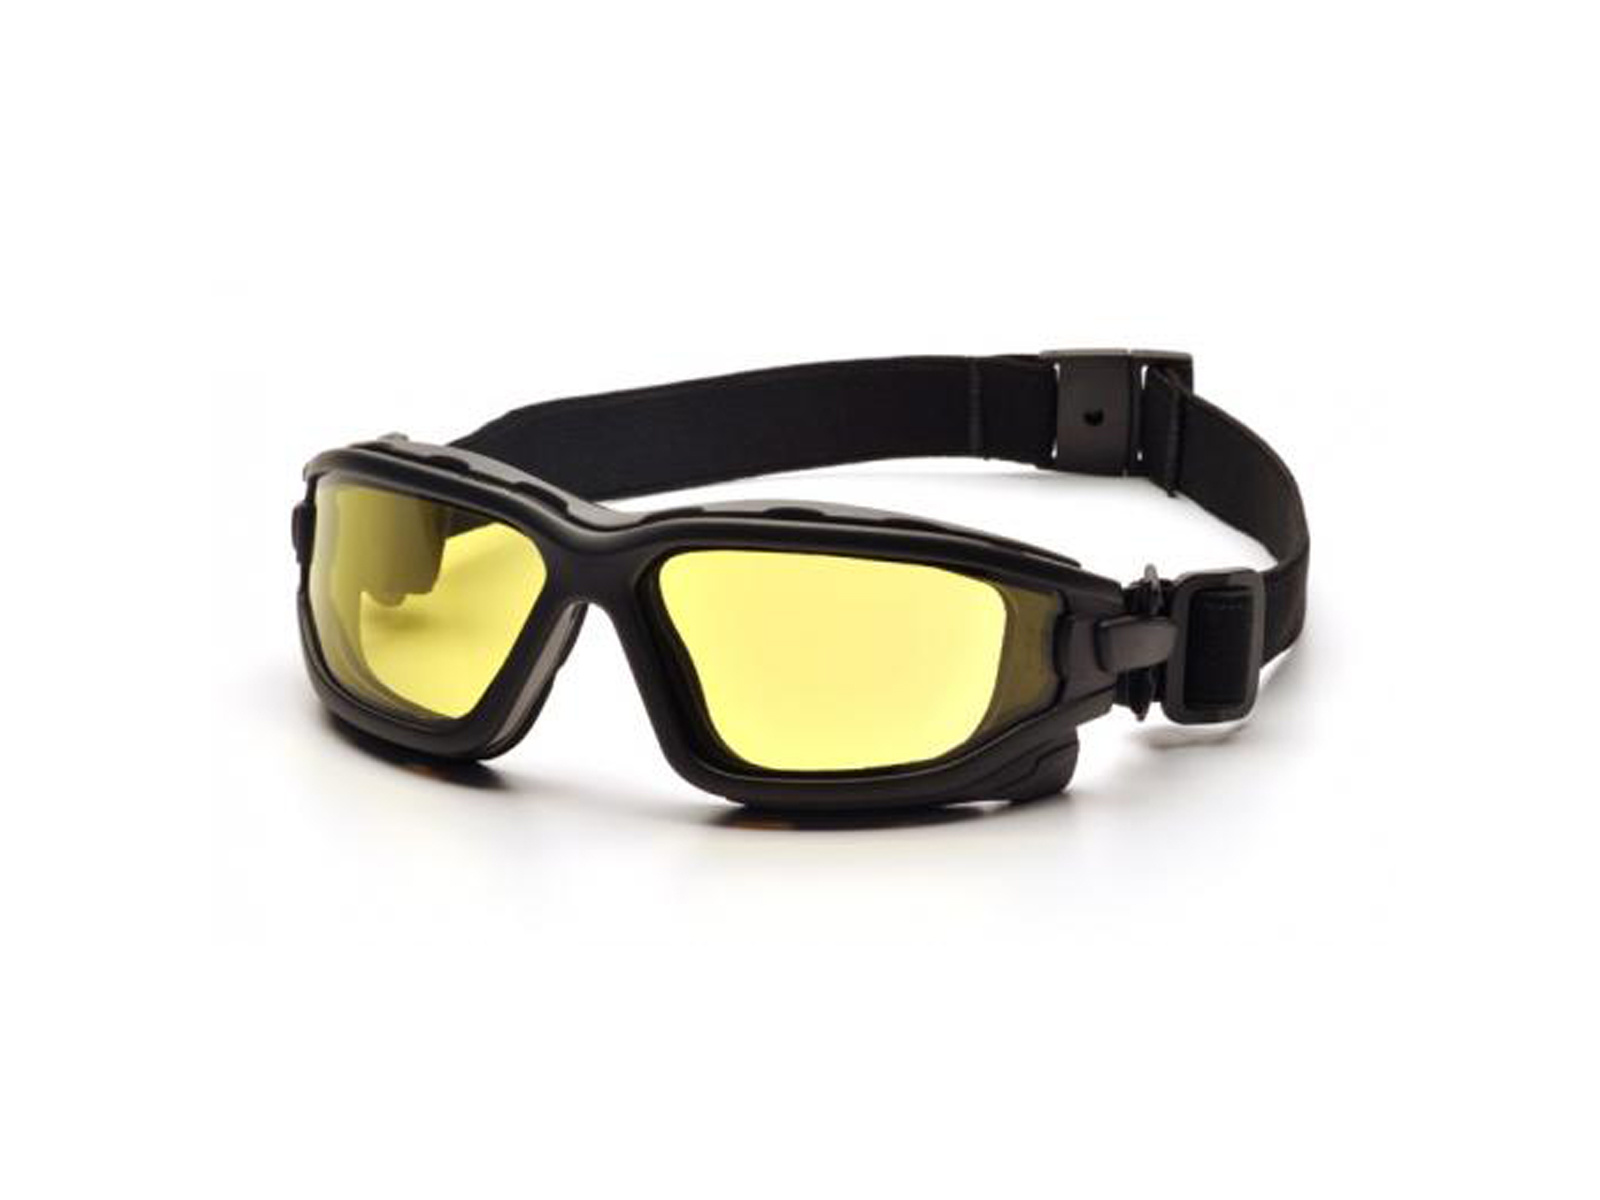 ASG Strike Systems Tactical Schutzbrille - Gelb